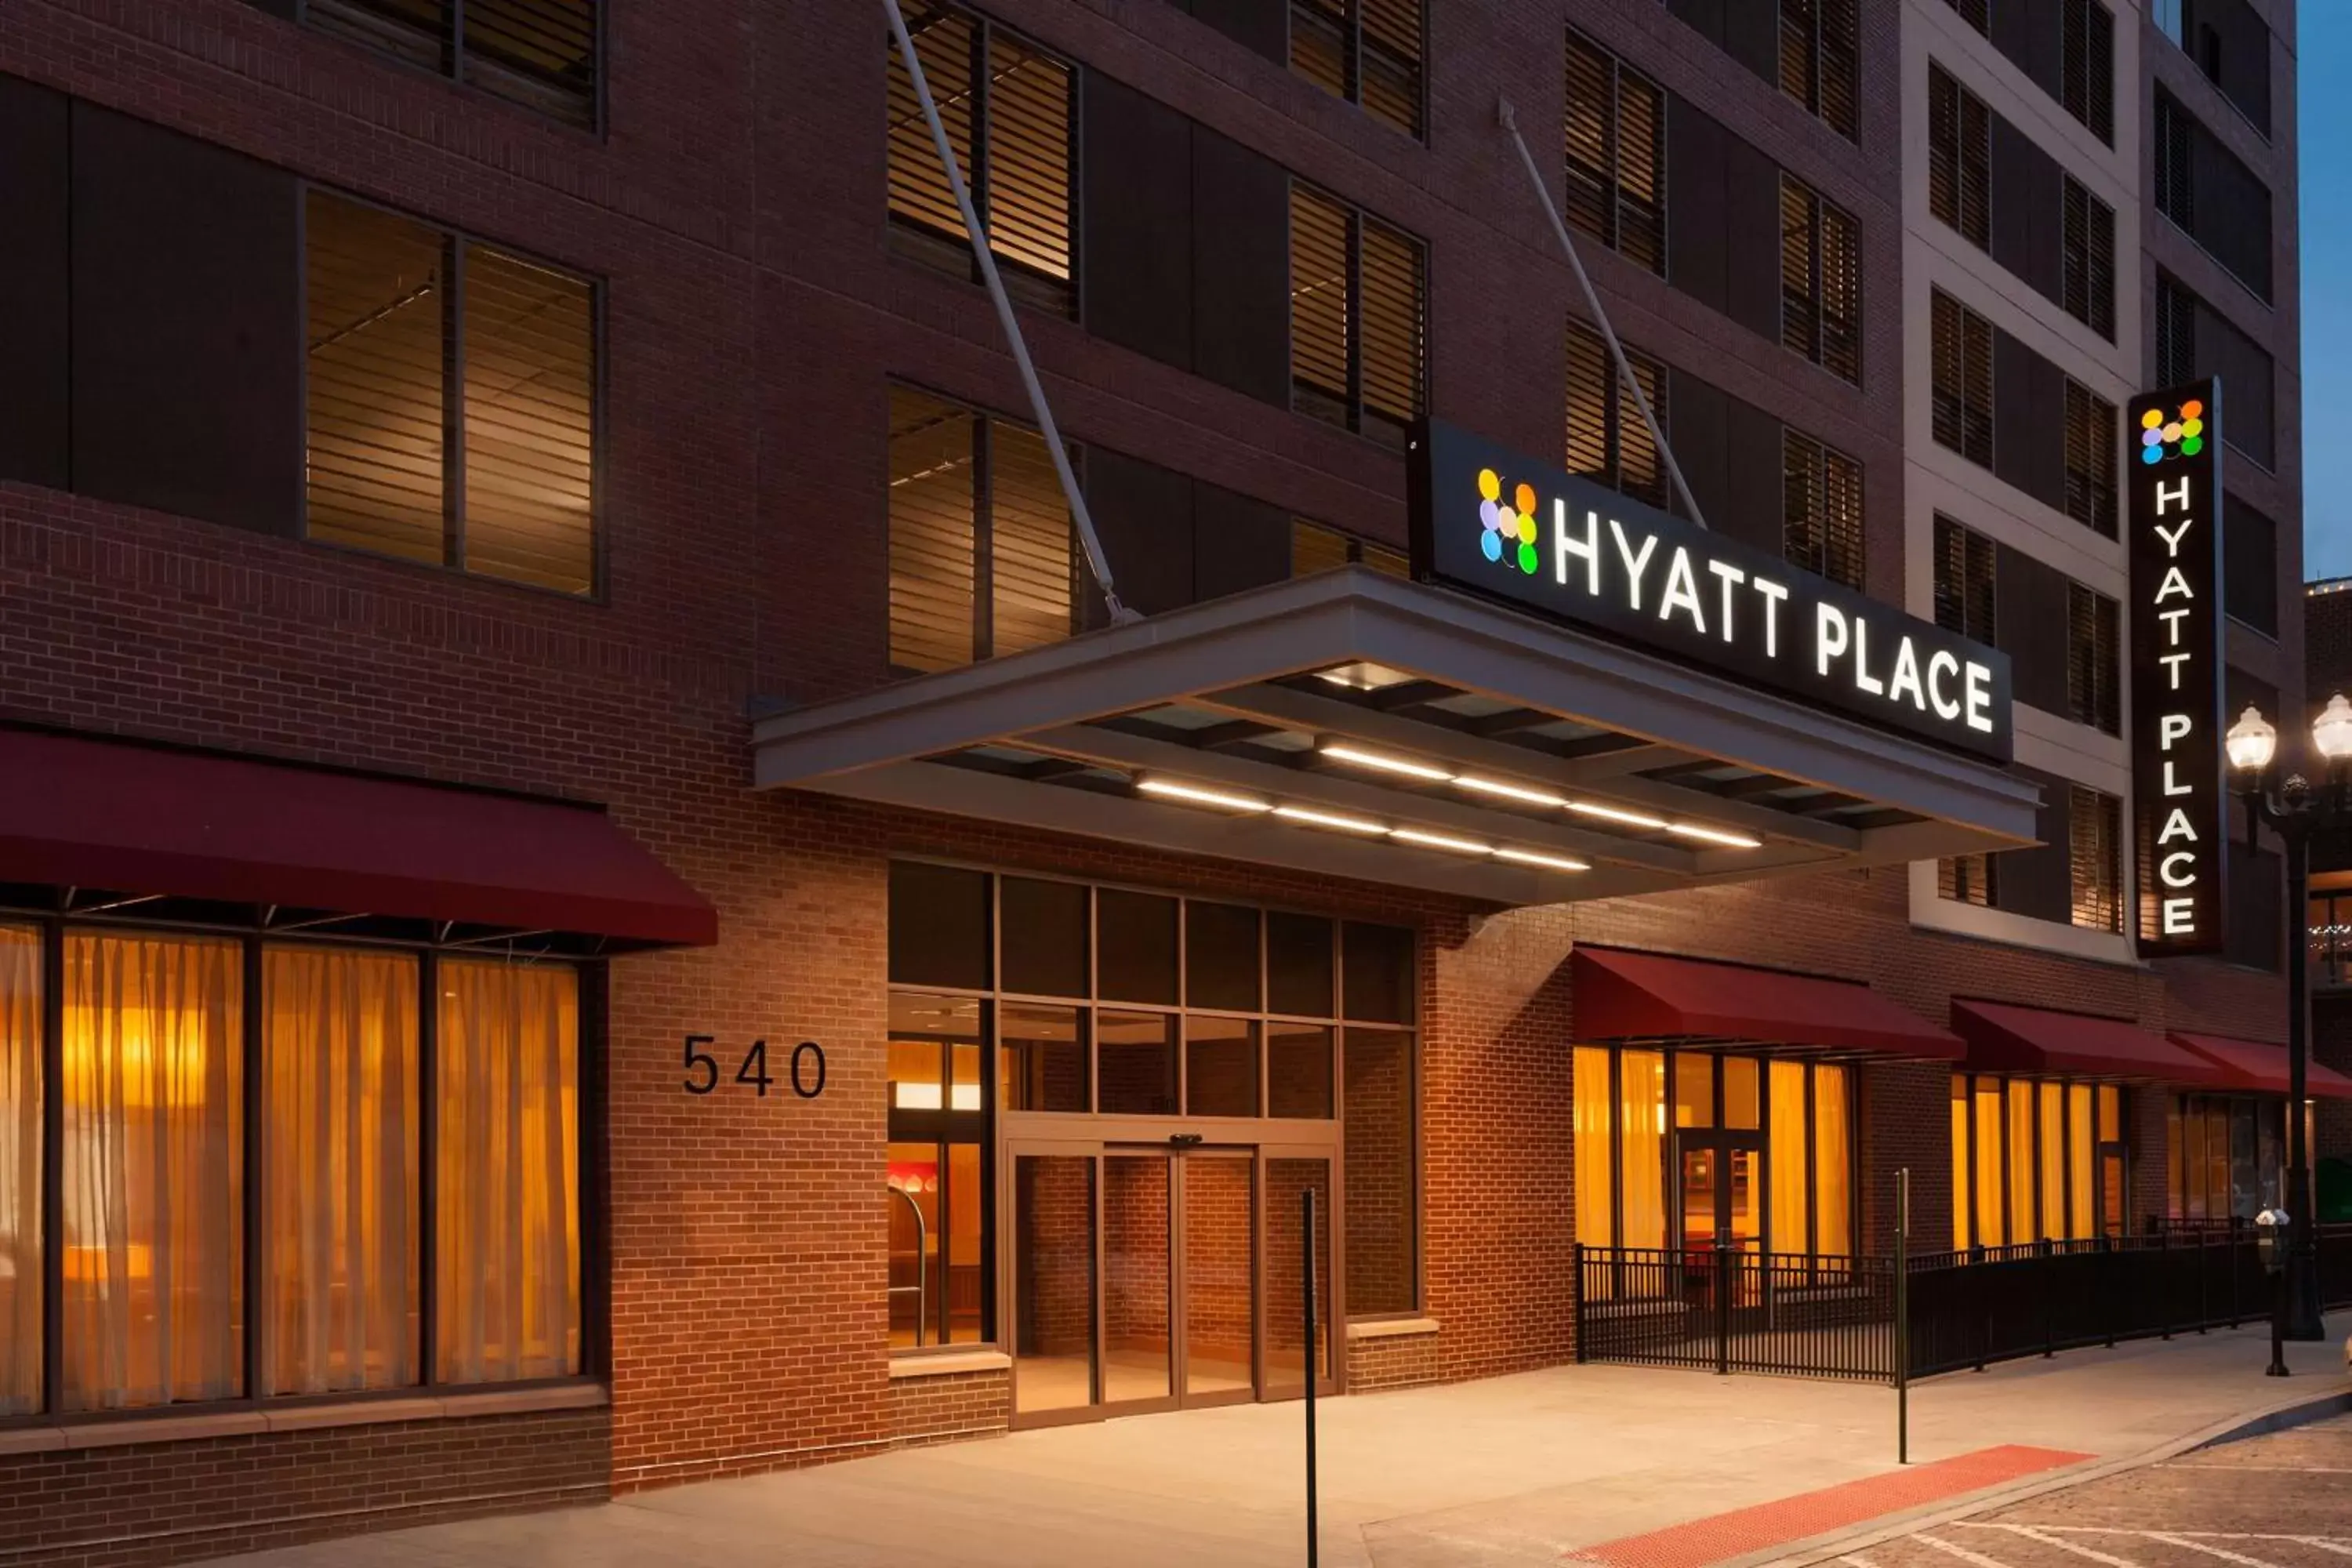 Property building in Hyatt Place Omaha/Downtown-Old Market